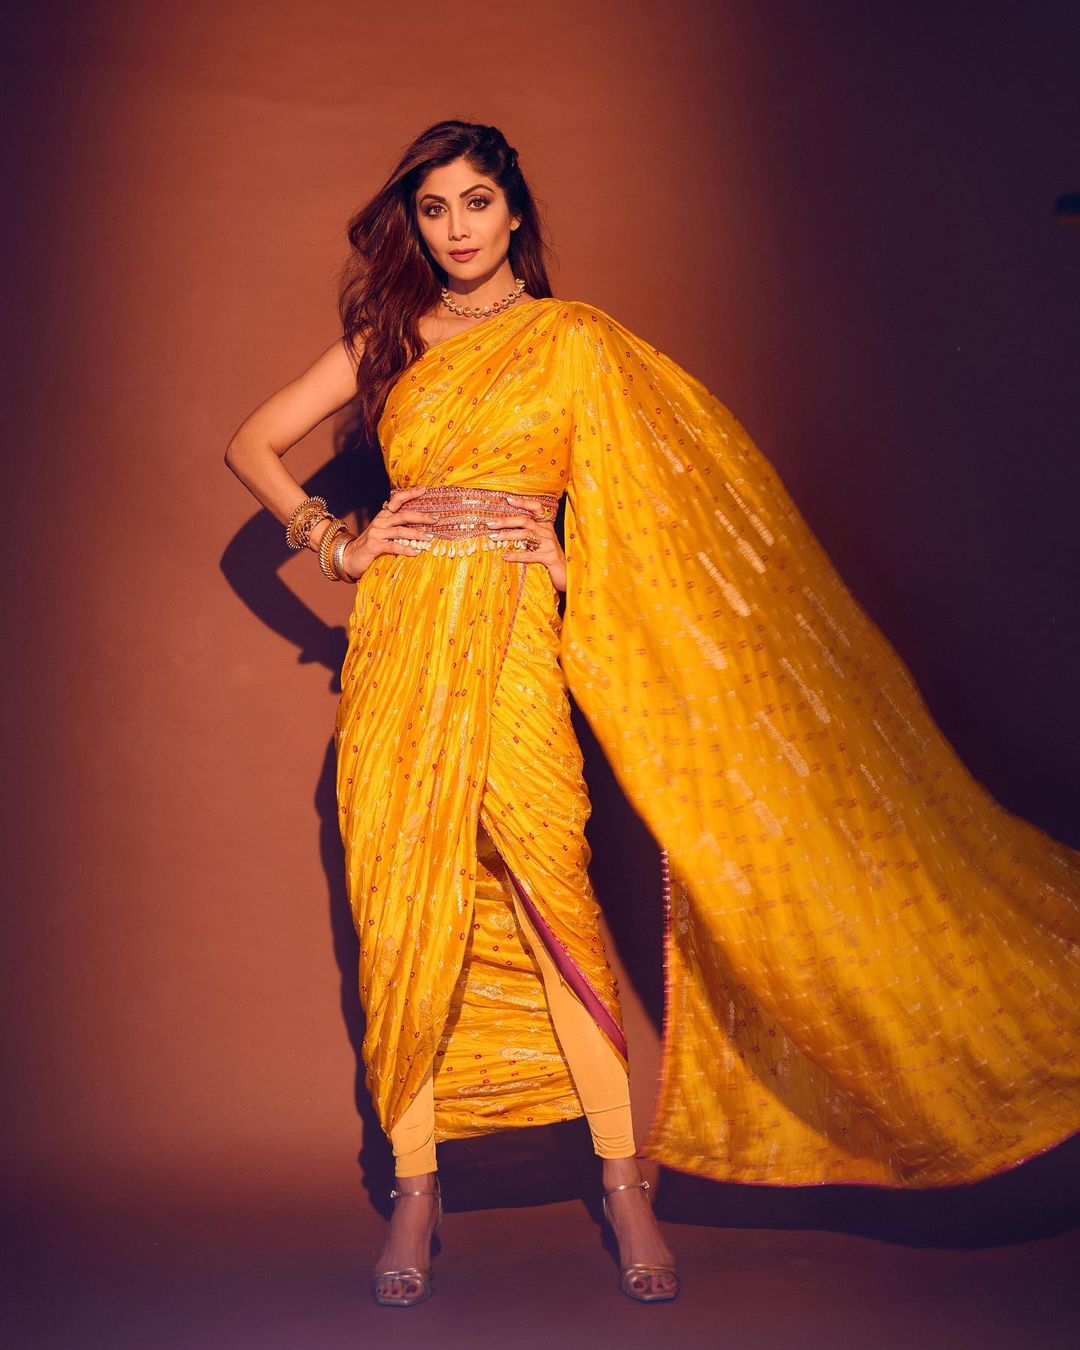 <a href='https://www.news18.com/news/movies/amid-raj-kundras-arrest-shilpa-shetty-says-i-will-live-every-moment-as-fully-as-i-can-4129883.html'>Shilpa Shetty</a> Kundra looks stunning in a dhoti saree.